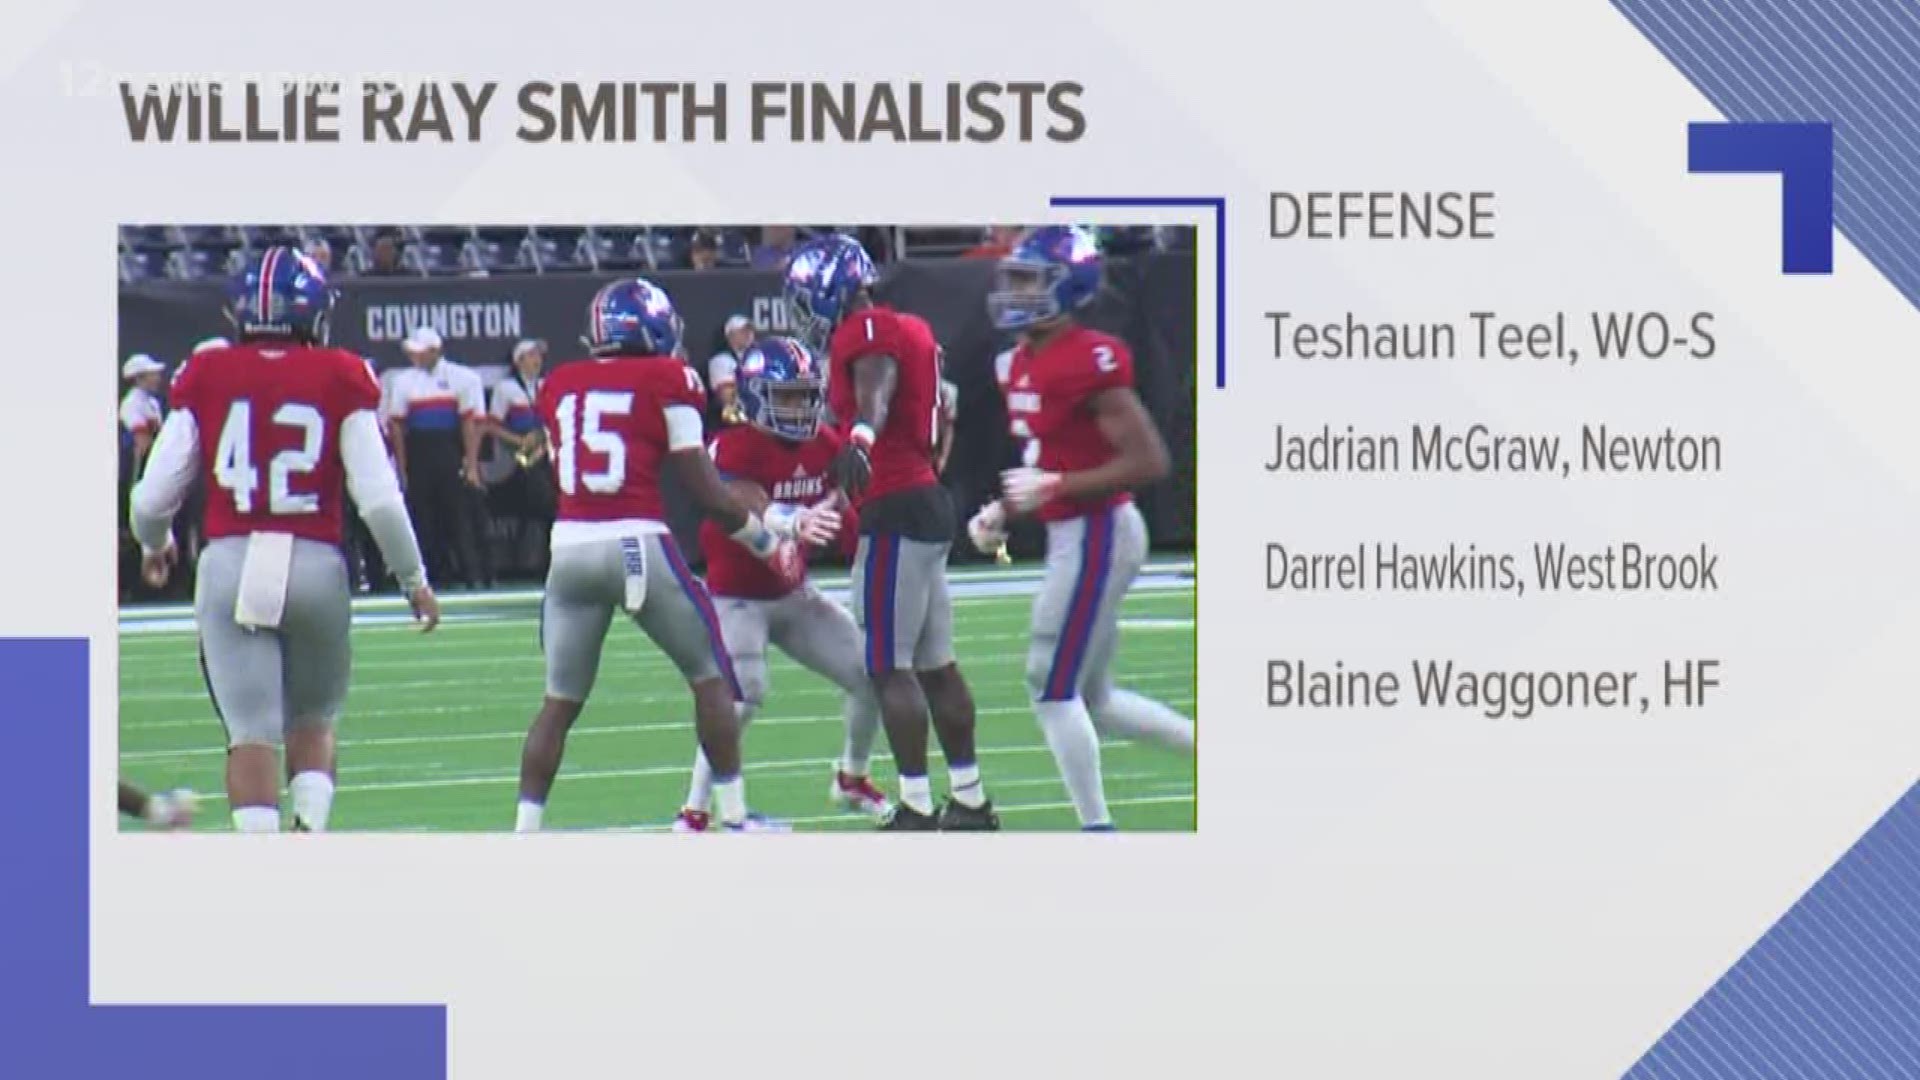 On Friday, January 18 we will hear from the defensive finalists and one week later, we'll meet the offensive finalists during out 6:00p.m. sportscast.